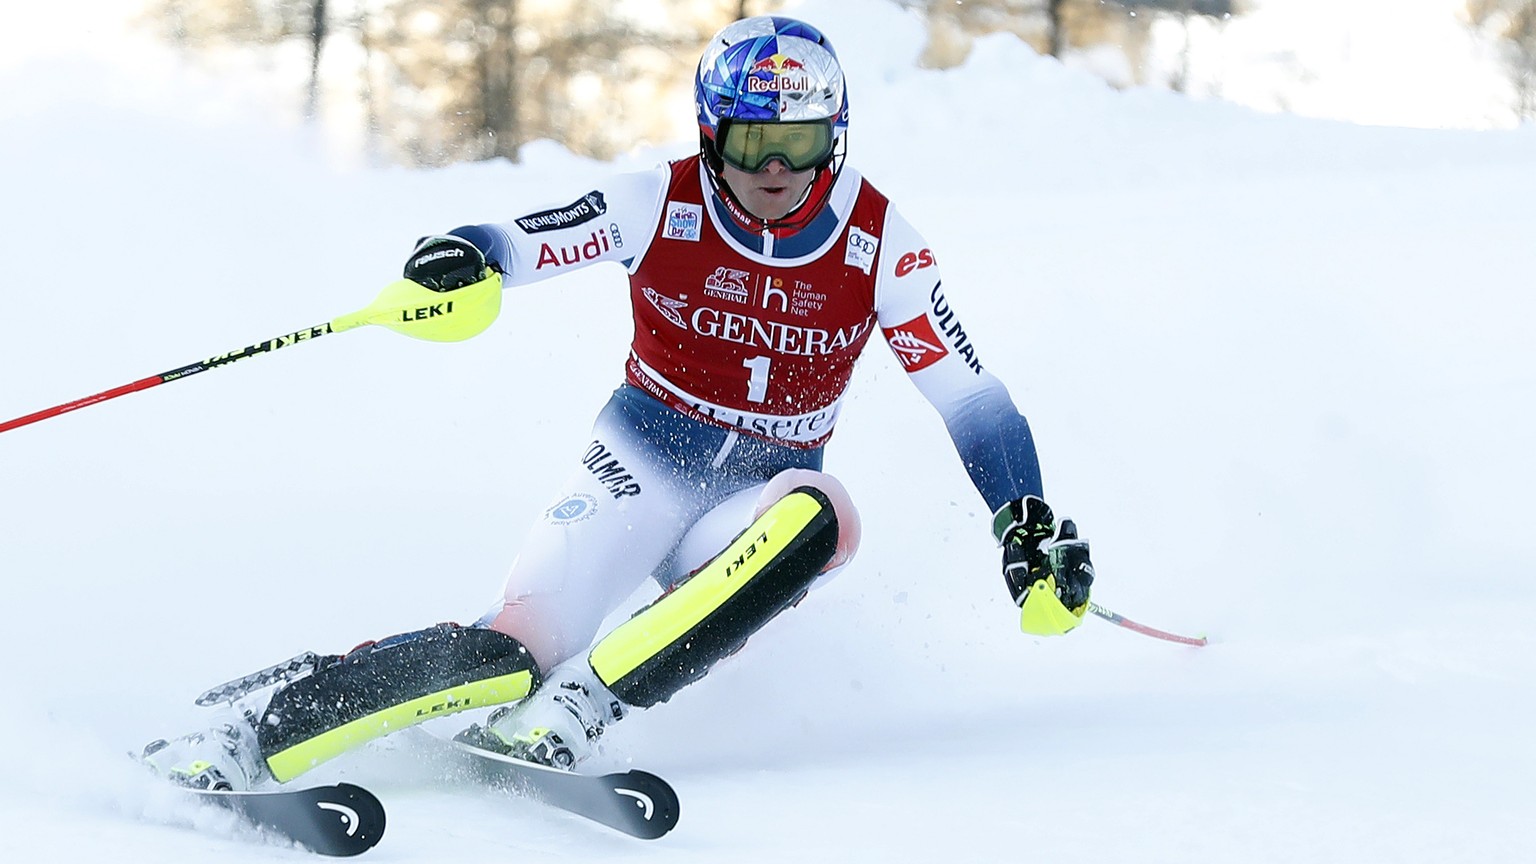 epa08072831 Alexis Pinturault of France in action during the Men's Slalom race at the FIS Alpine Skiing World Cup in Val d'Isere, France, 15 December 2019 EPA/SEBASTIEN NOGIER